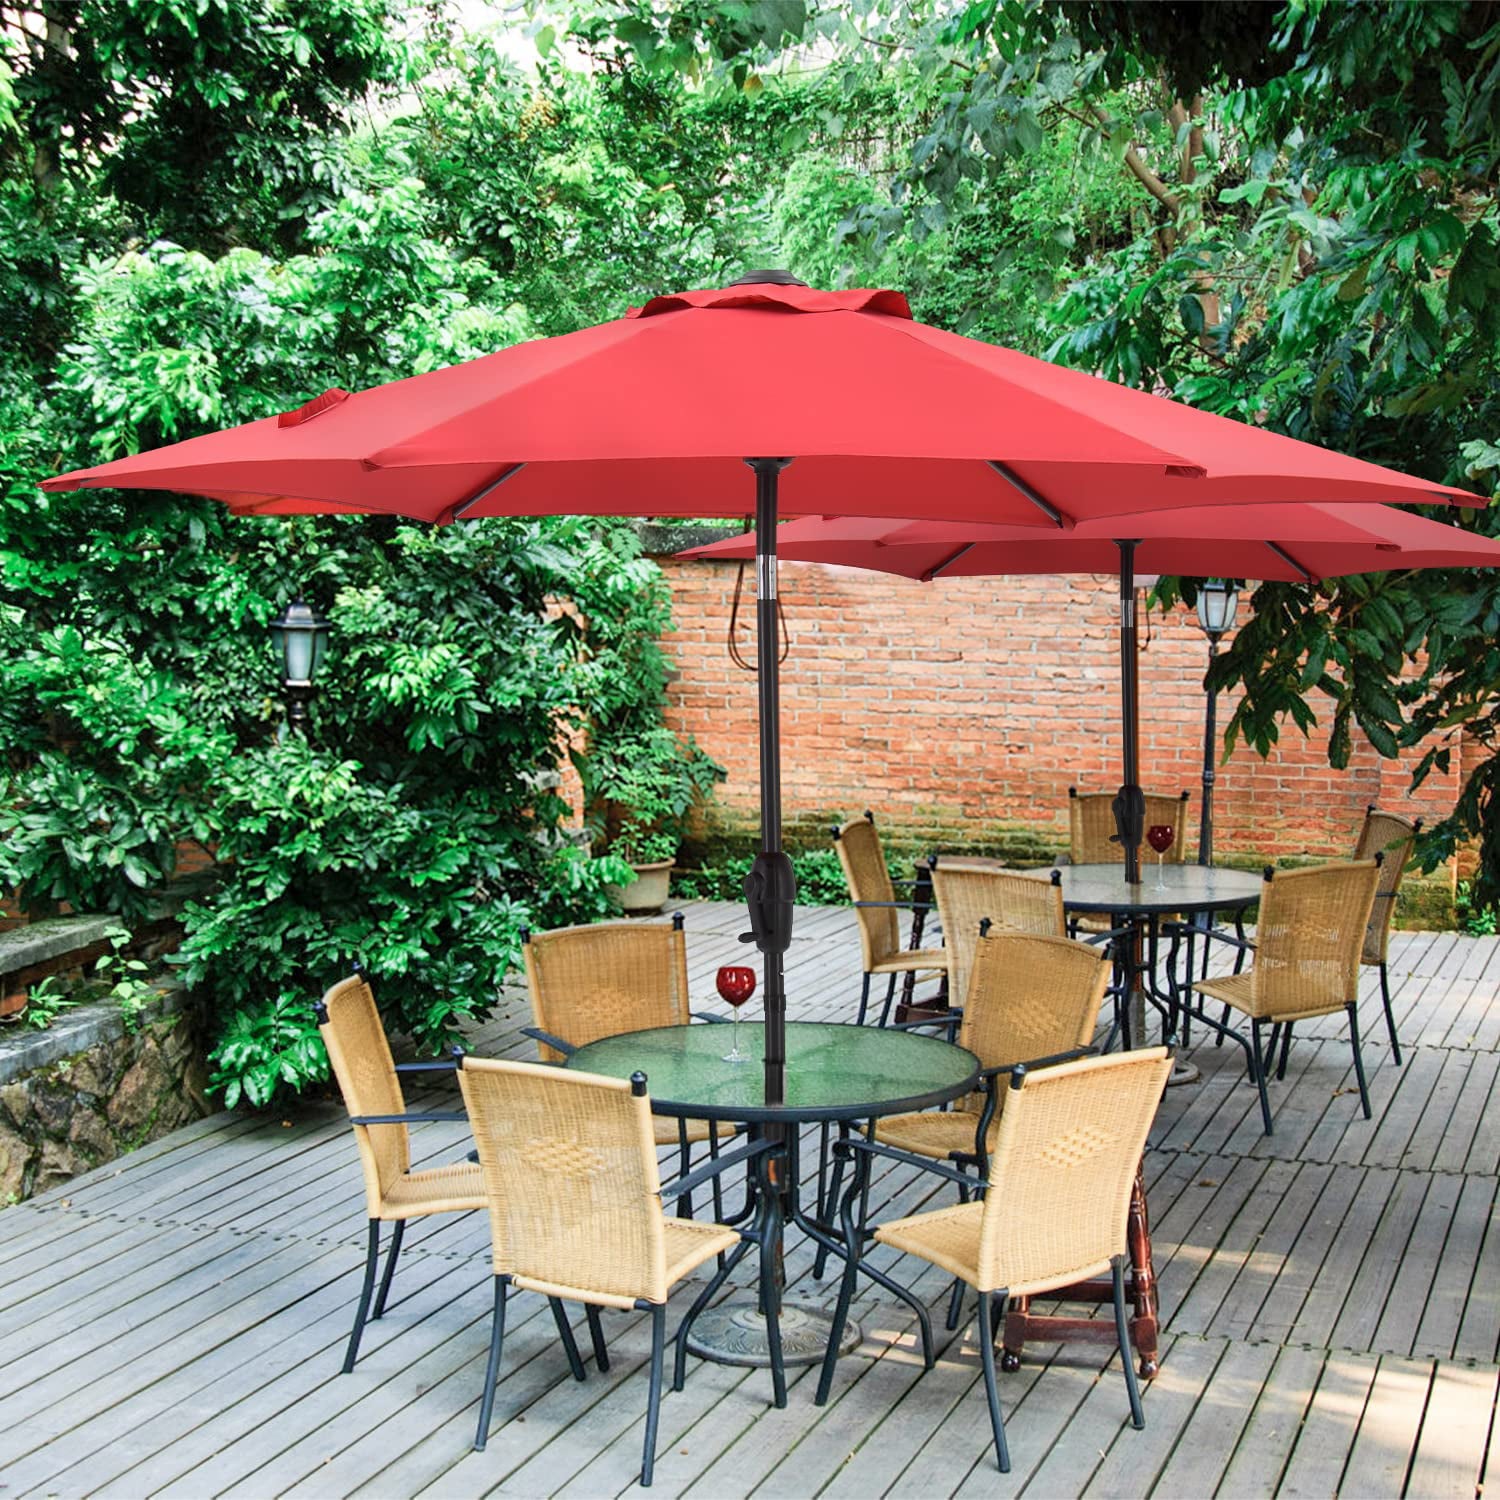 Essential Lounger 7.5ft Patio Umbrella Outdoor with 6 Sturdy Ribs, Waterproof & UV Resistant Patio Table Umbrella, Deck, Backyard& Pool, Red